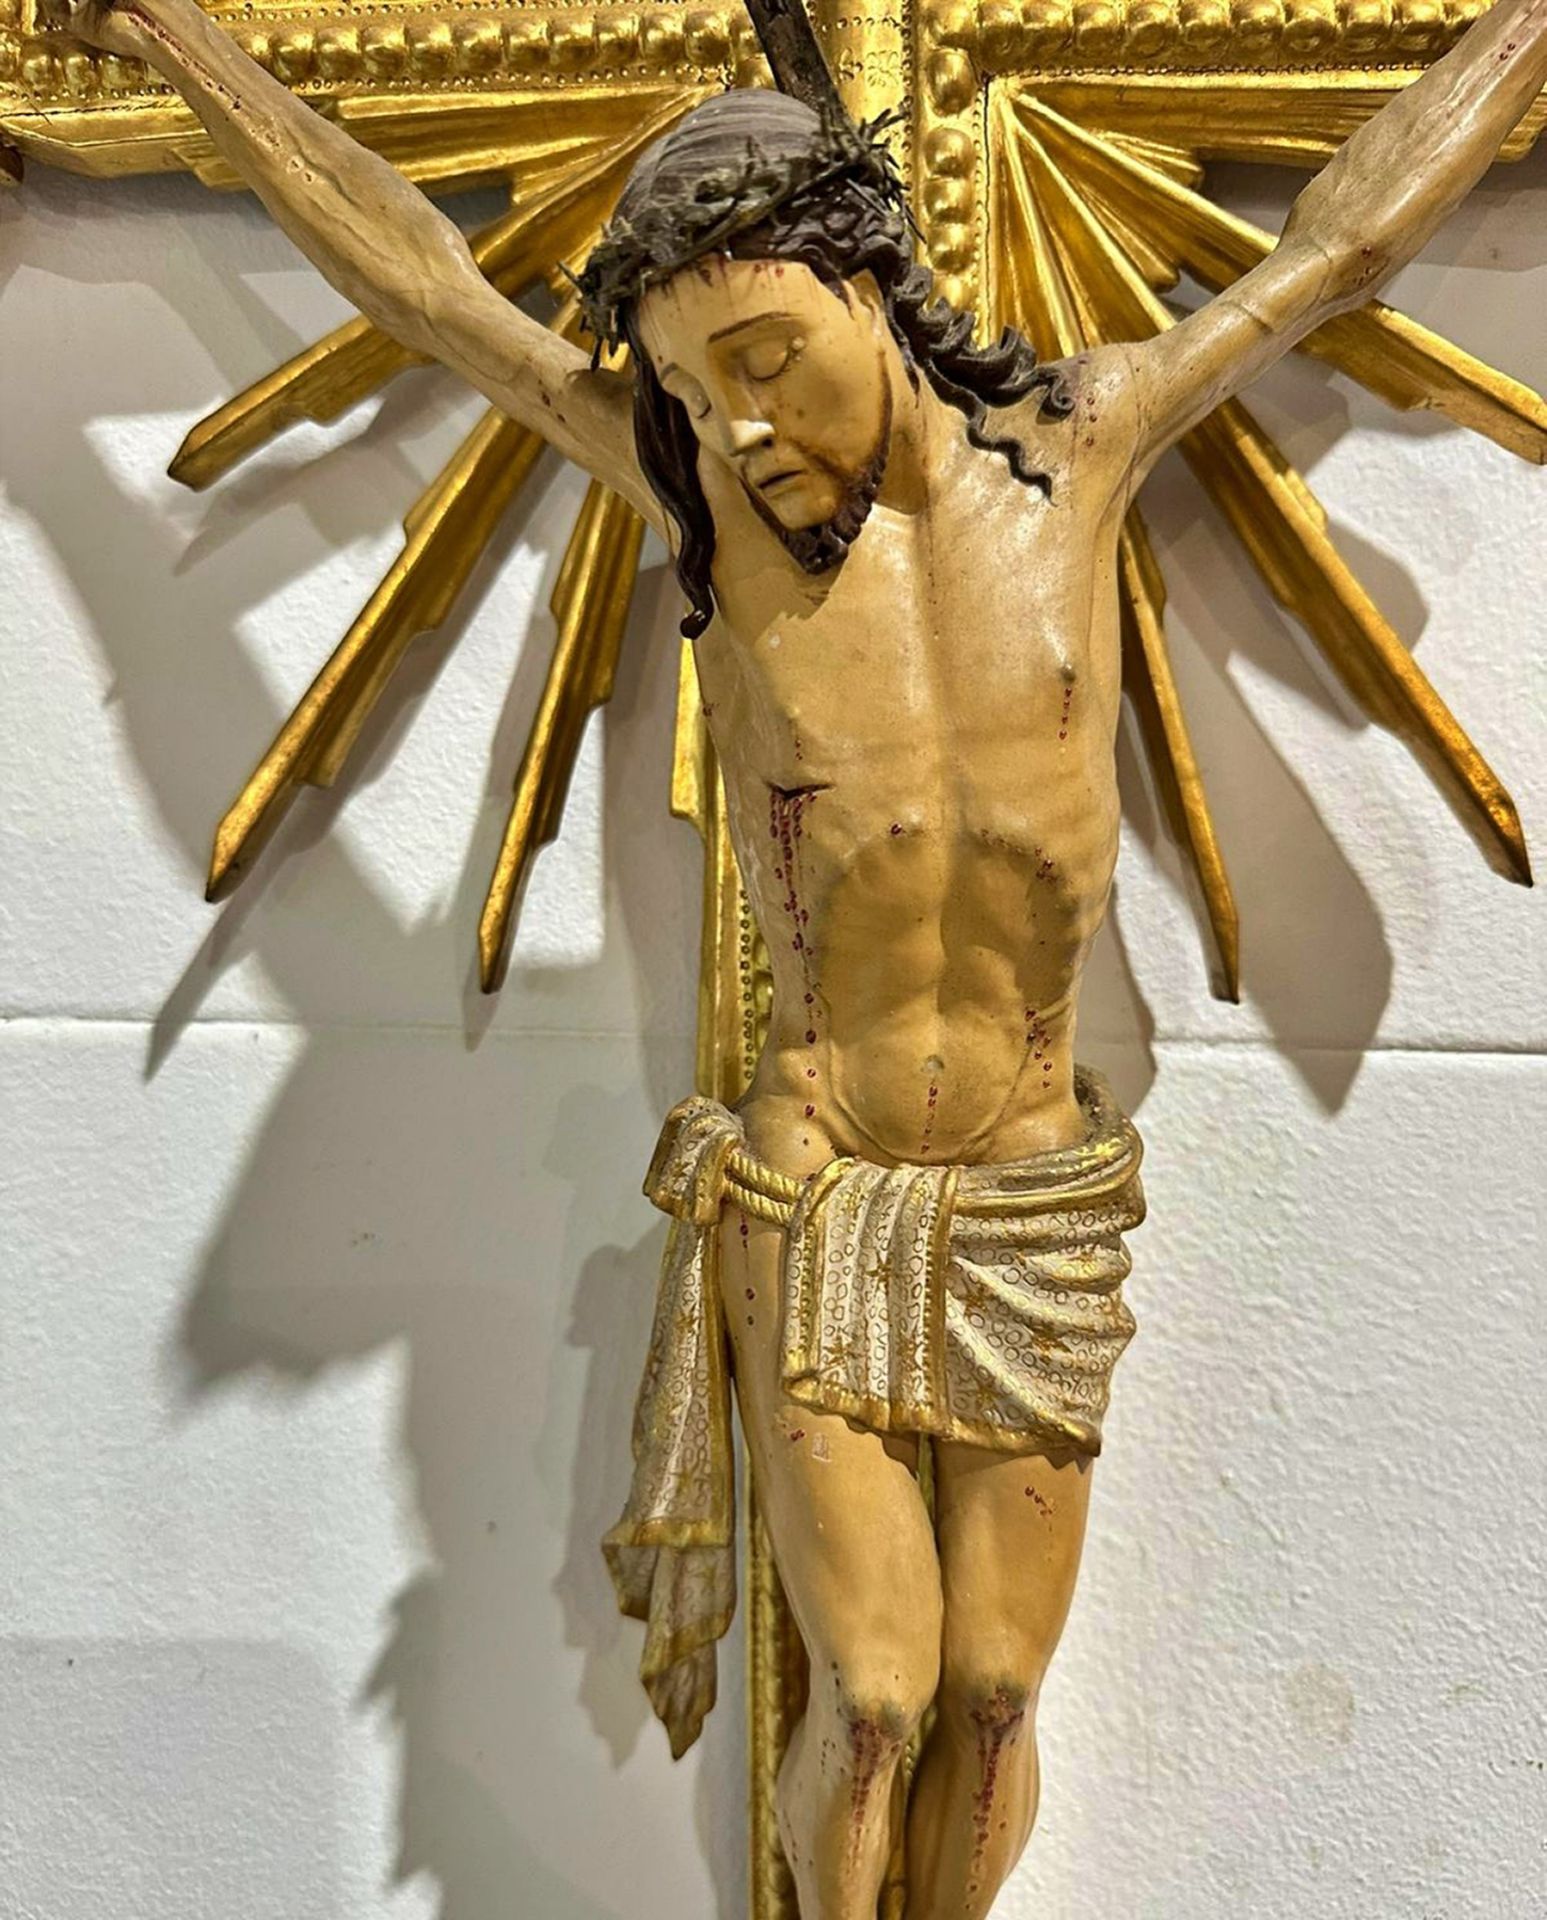 Rare New Spanish colonial Christ from the 17th - 18th century, Mexican colonial school - Image 3 of 3